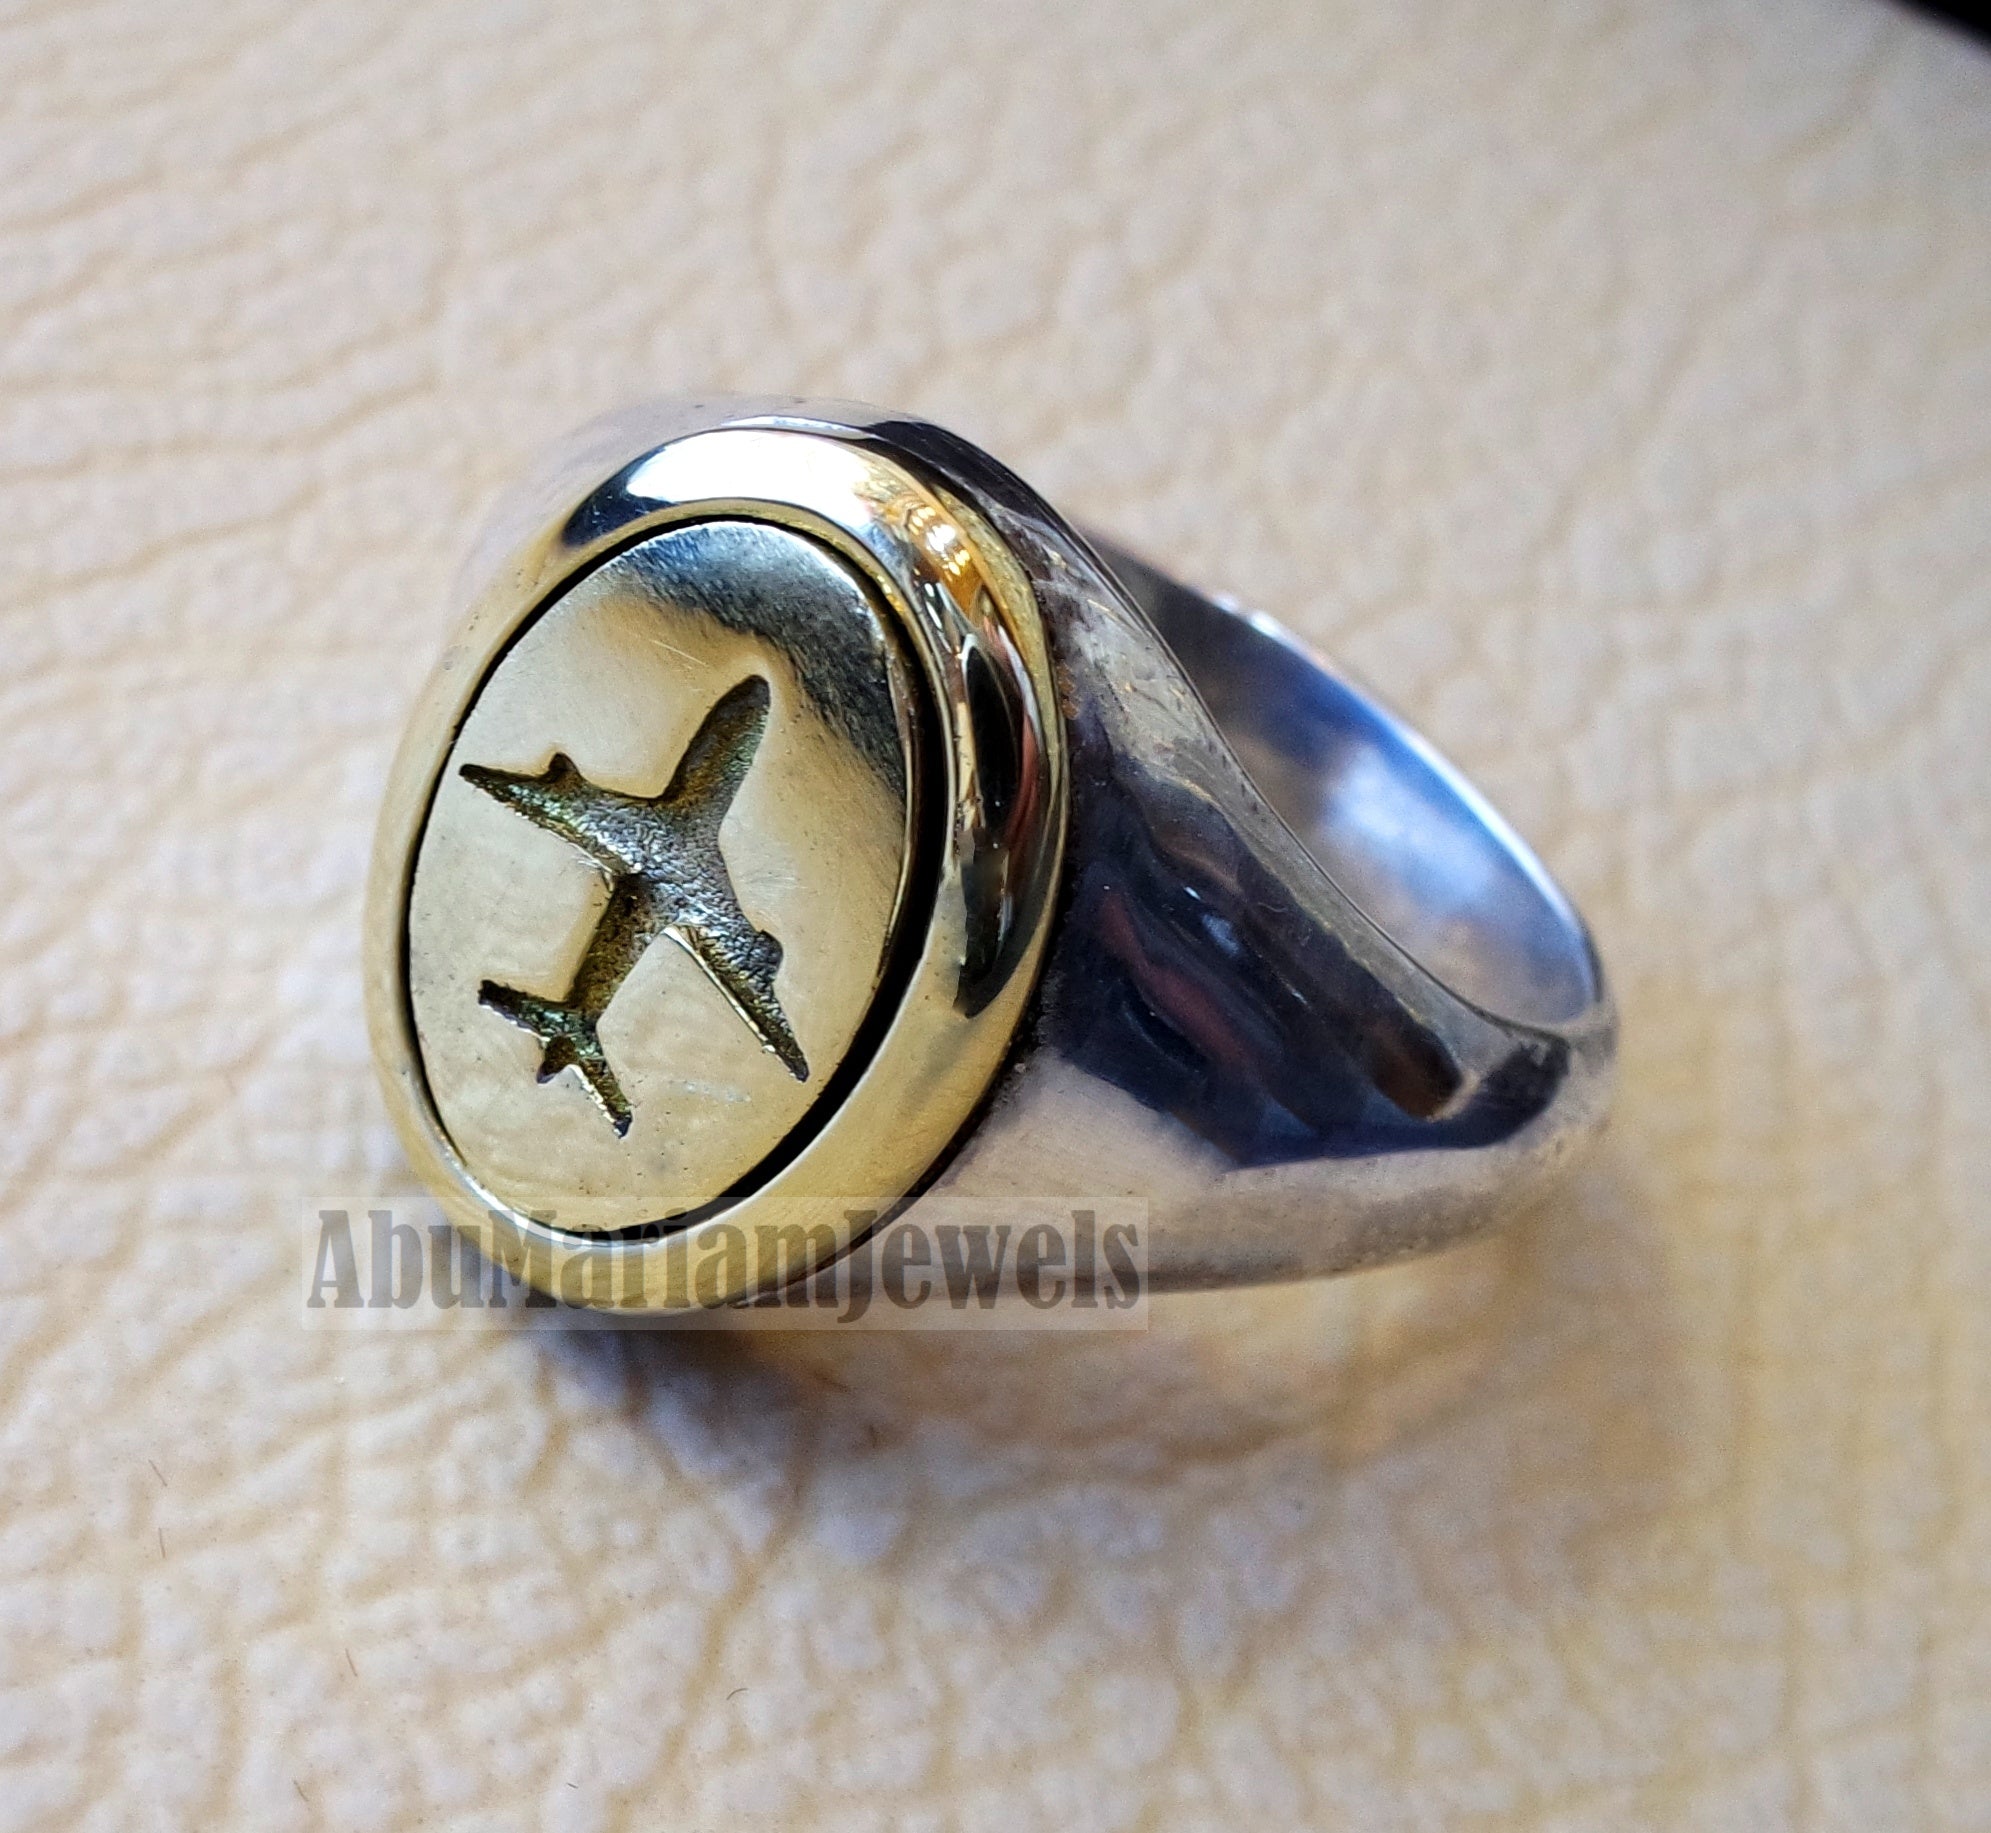 Lexus sterling silver 925 and bronze heavy man ring new car ideal gift –  Abu Mariam Jewelry